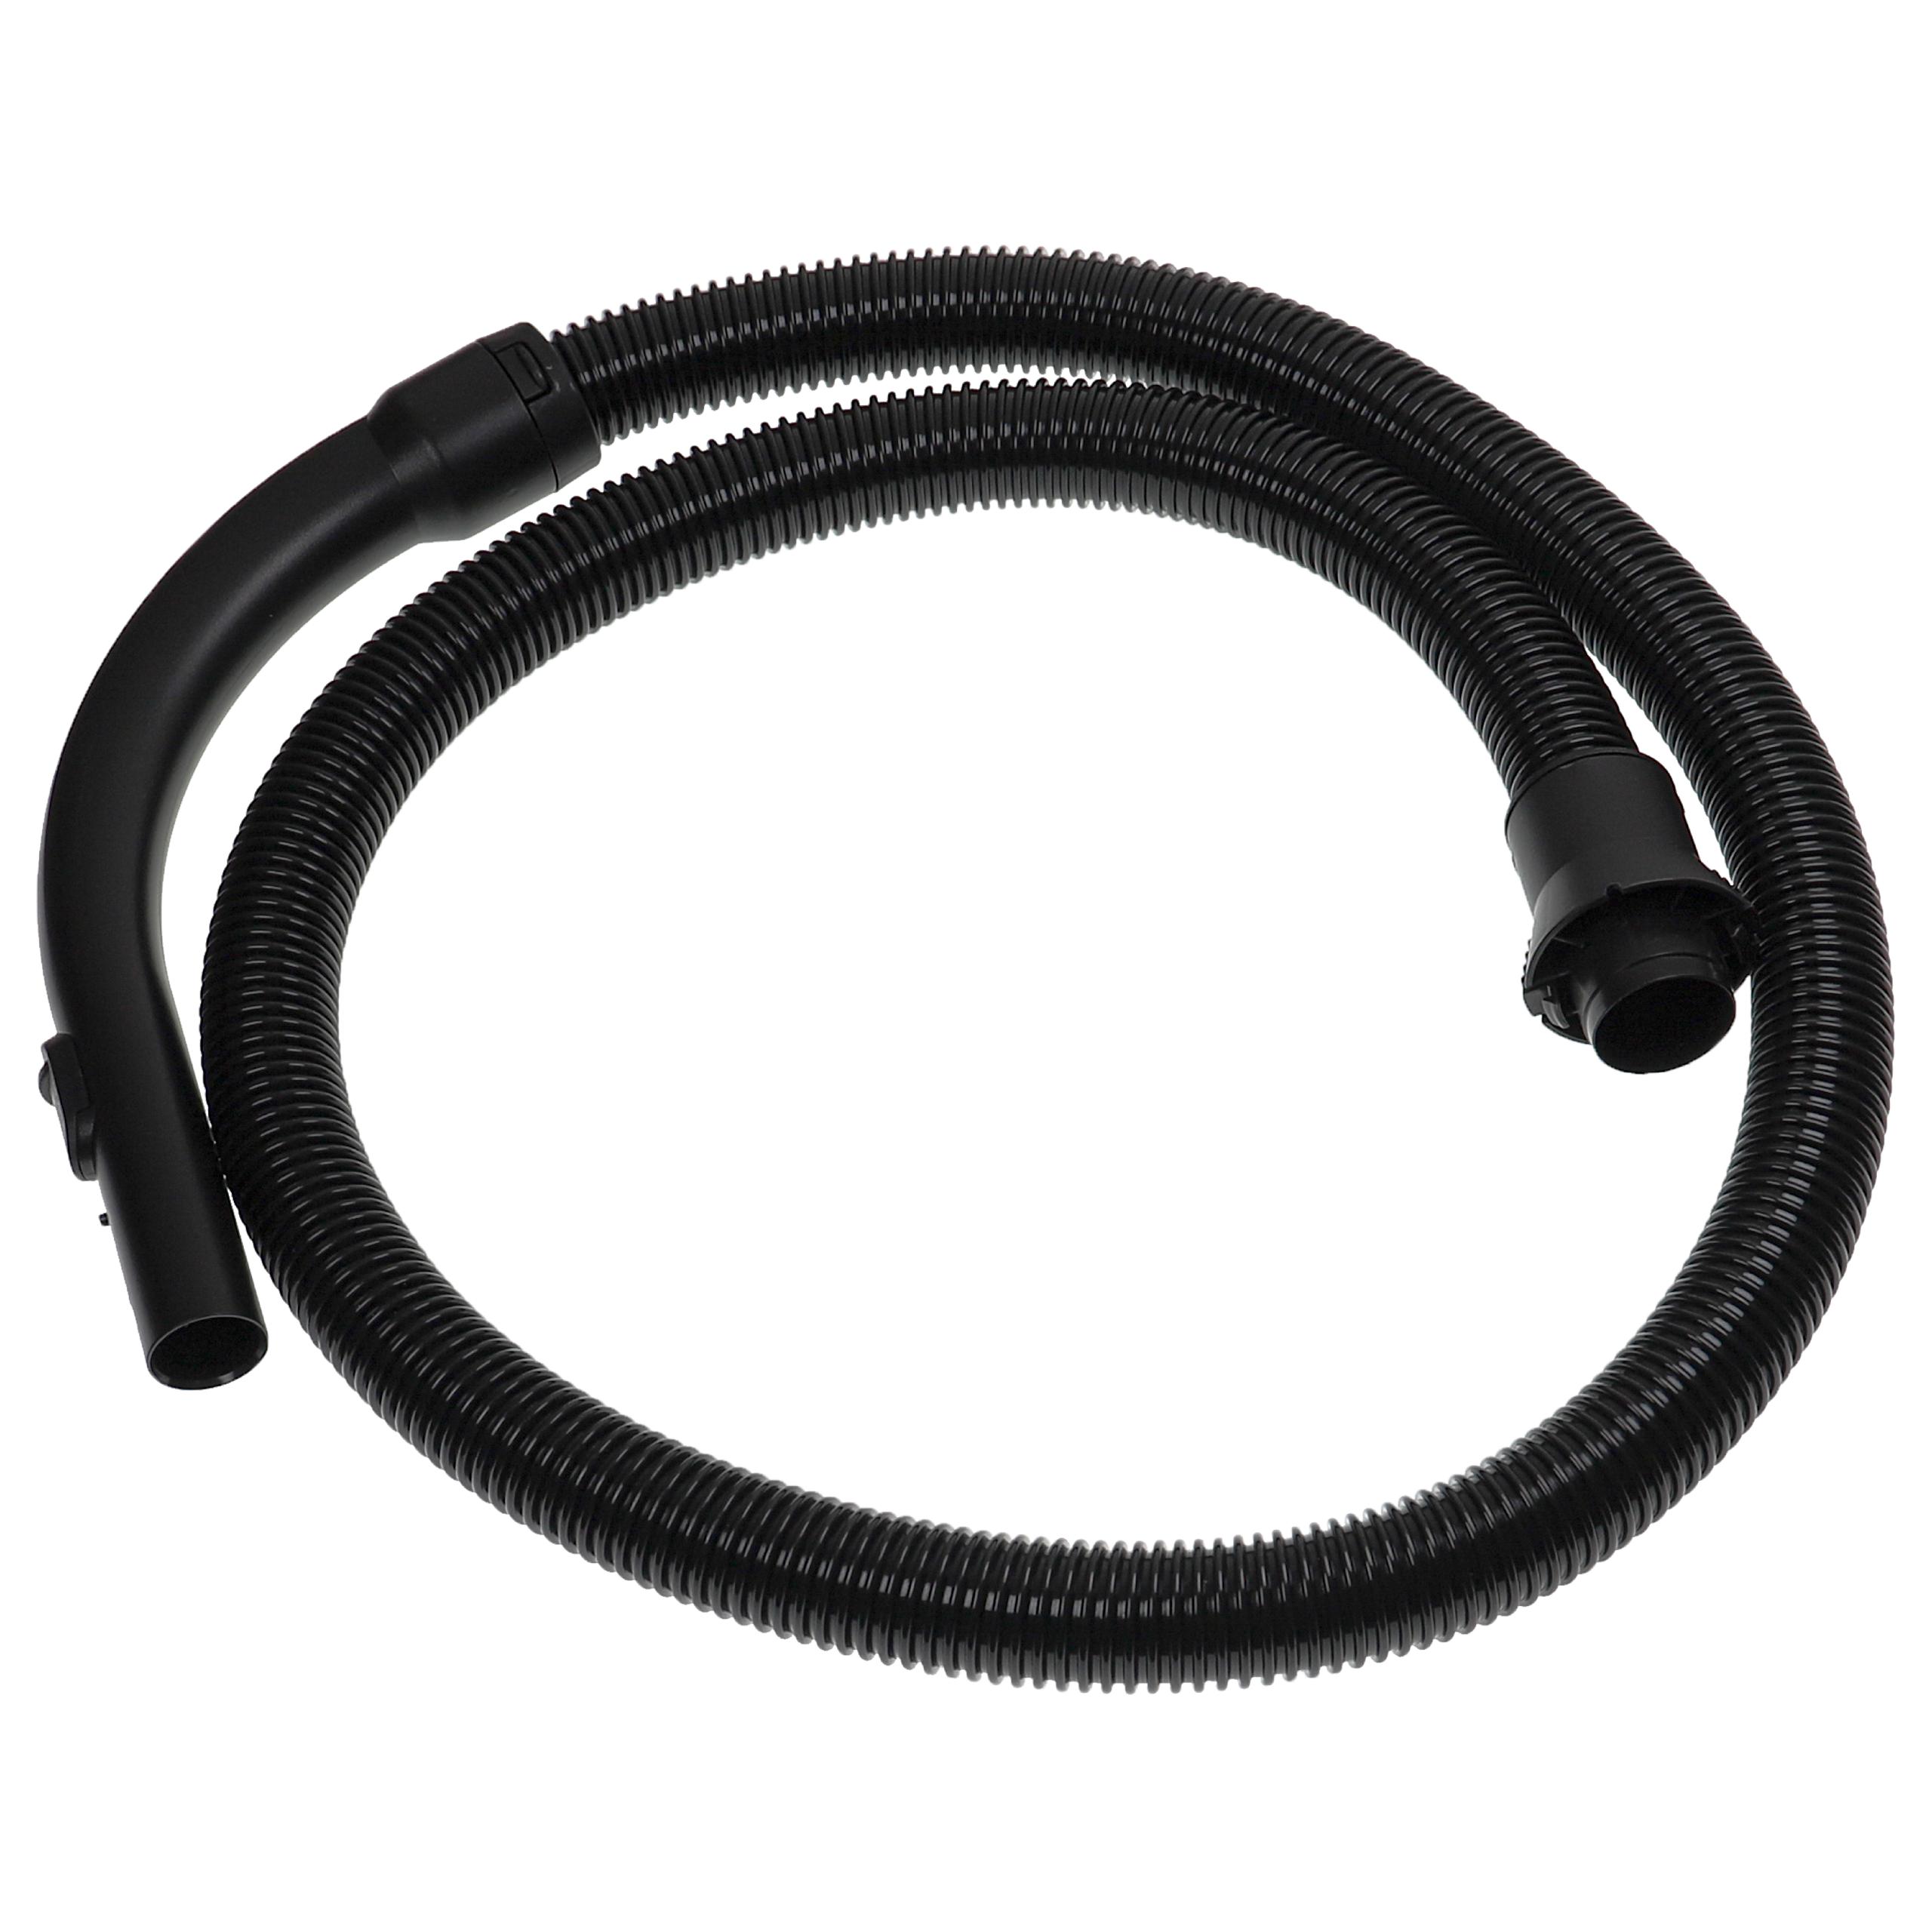 Hose as Replacement for Miele 07330631 - with Handle, 1.8 m long